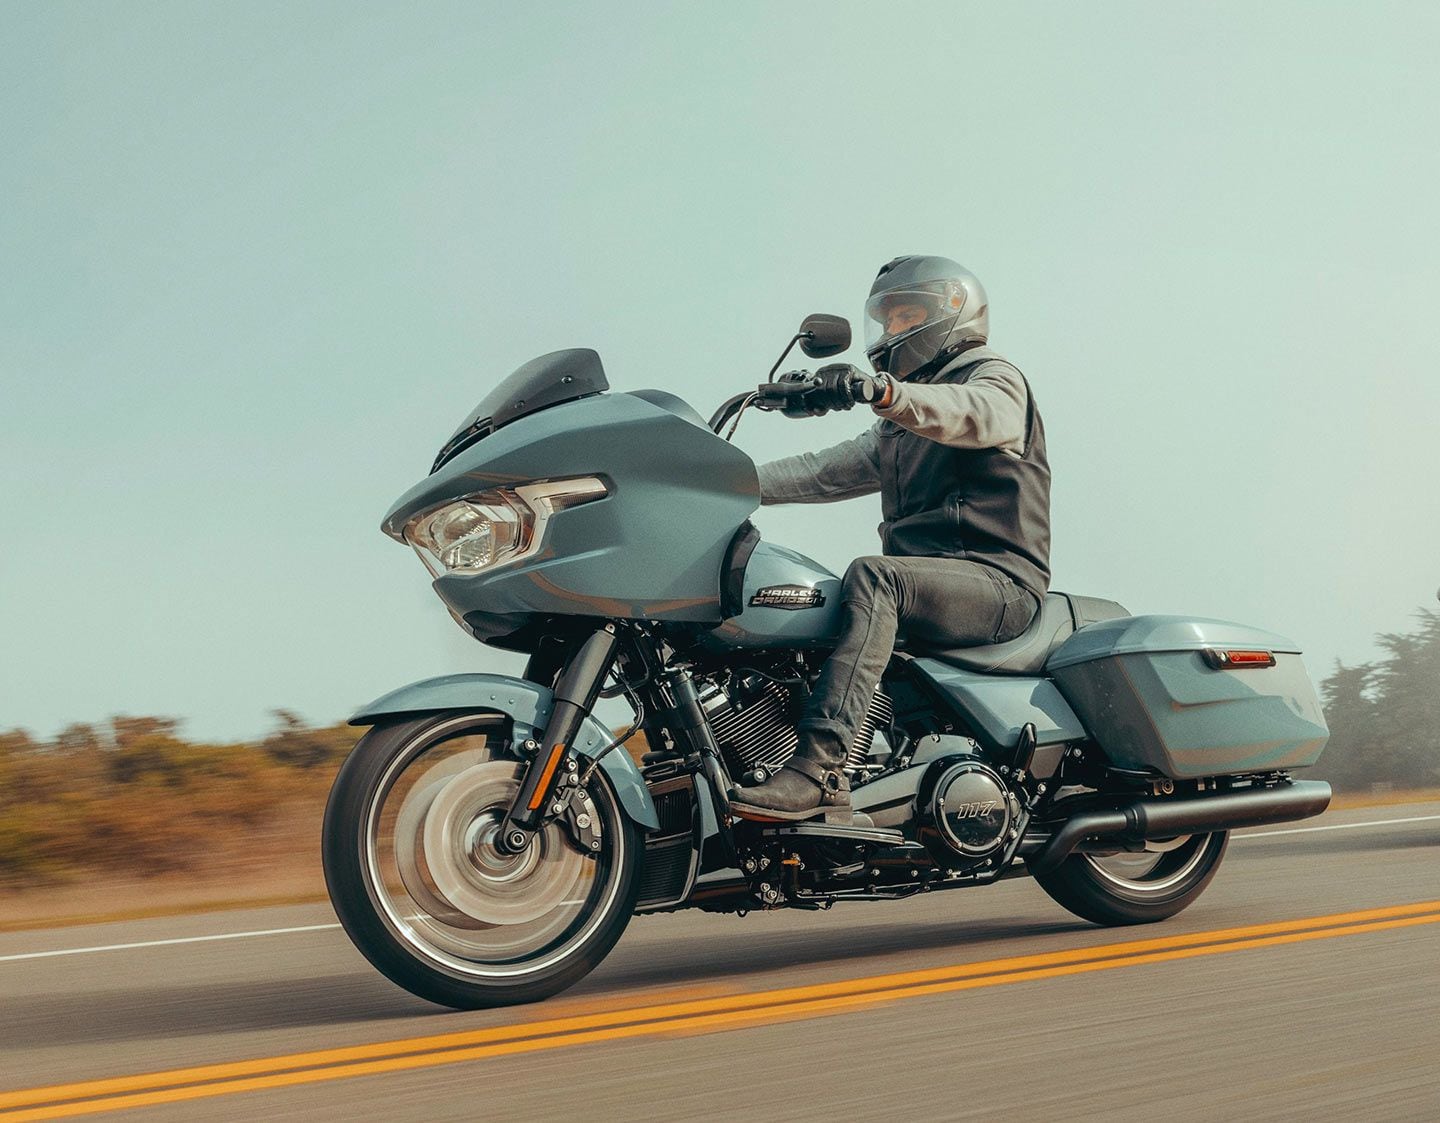 The 2024 Road Glide also runs with the Milwaukee-Eight 117 engine, which increases displacement, torque, and horsepower over the previous mill. The new bike is also 16 pounds lighter than the 2023 Road Glide Special.